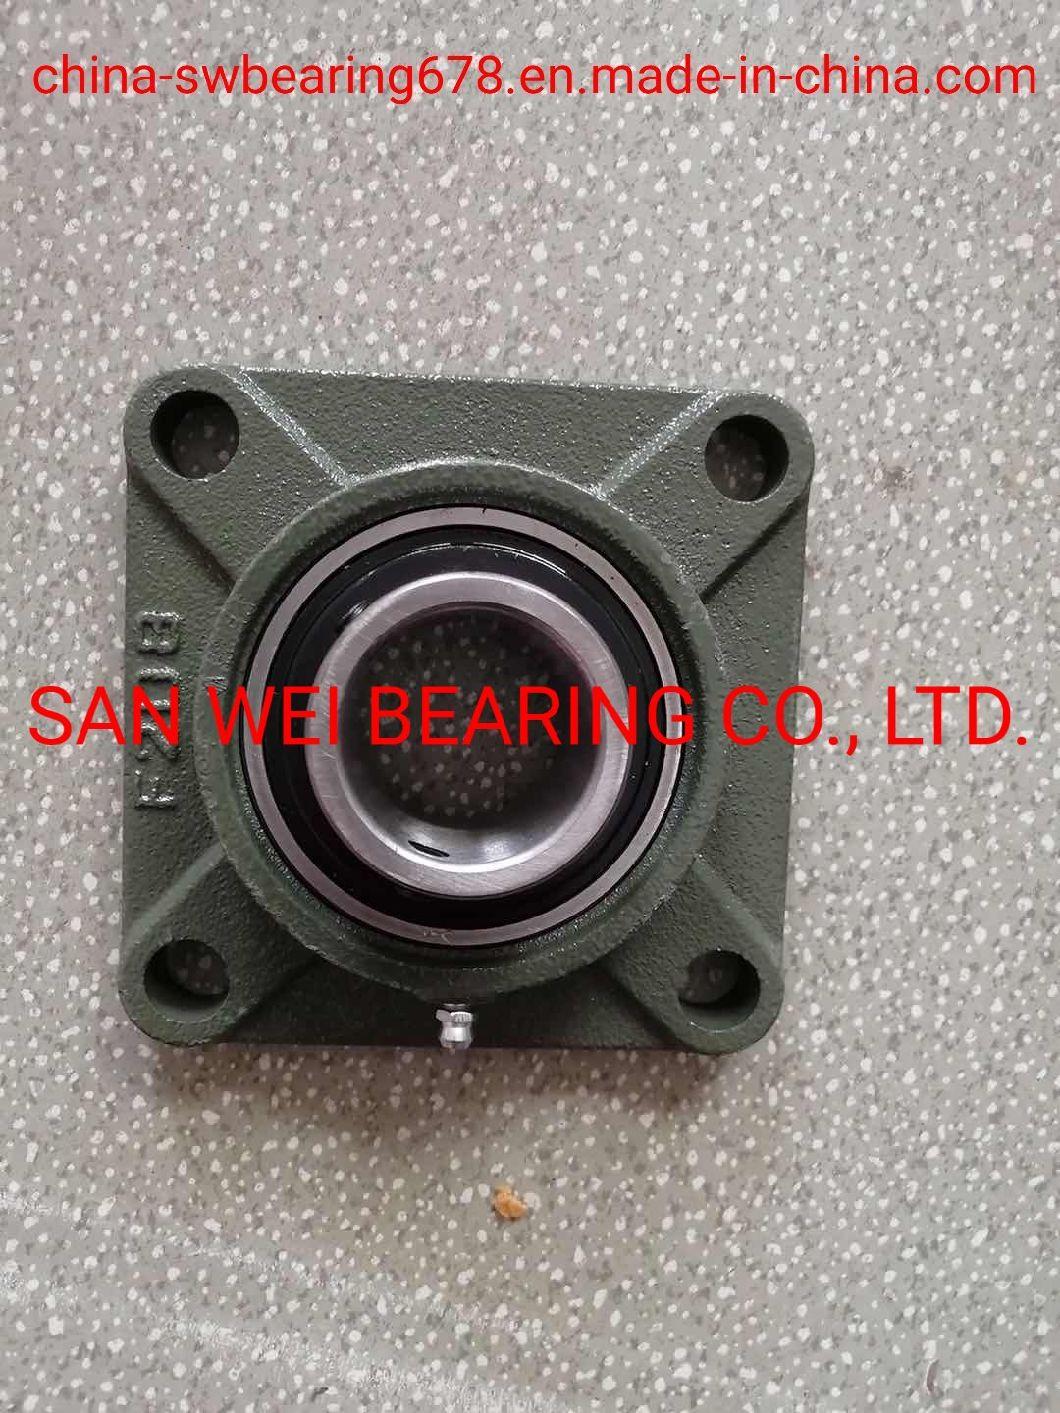 OEM Brand Chrome Steel UCP211 Pillow Block Ball Bearing UCP207 Auto Bearing with Competitive Price